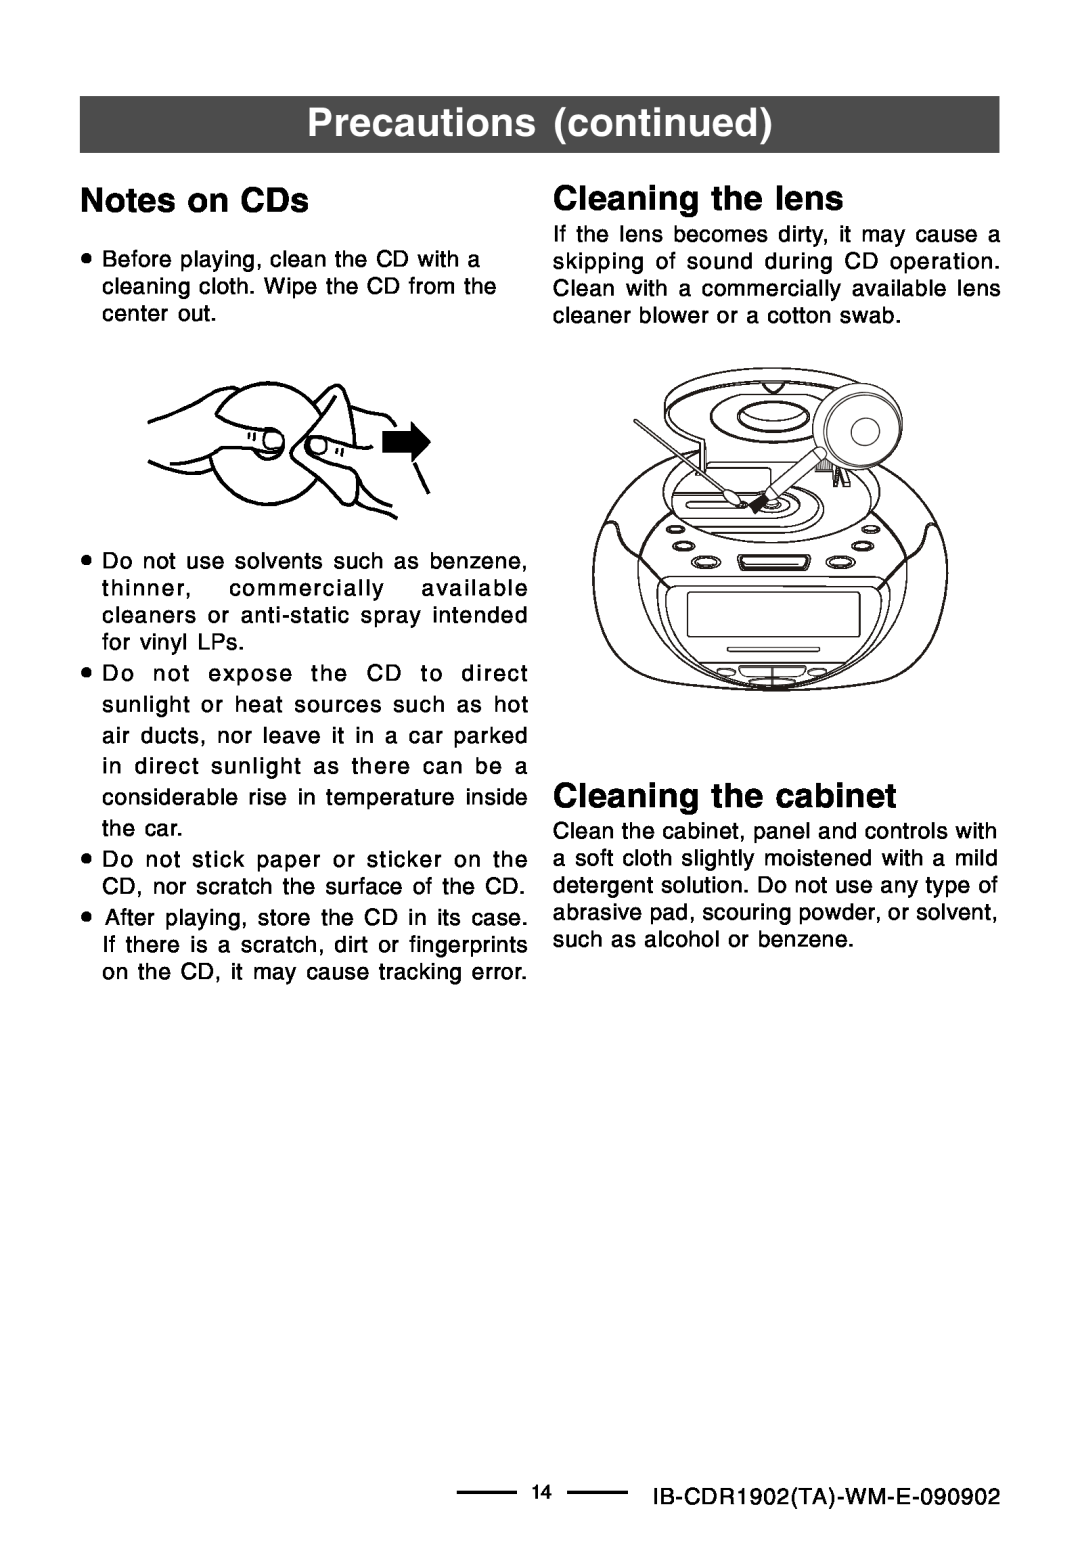 Lenoxx Electronics CDR-1902 Precautions continued, Notes on CDs, Cleaning the lens, Cleaning the cabinet 